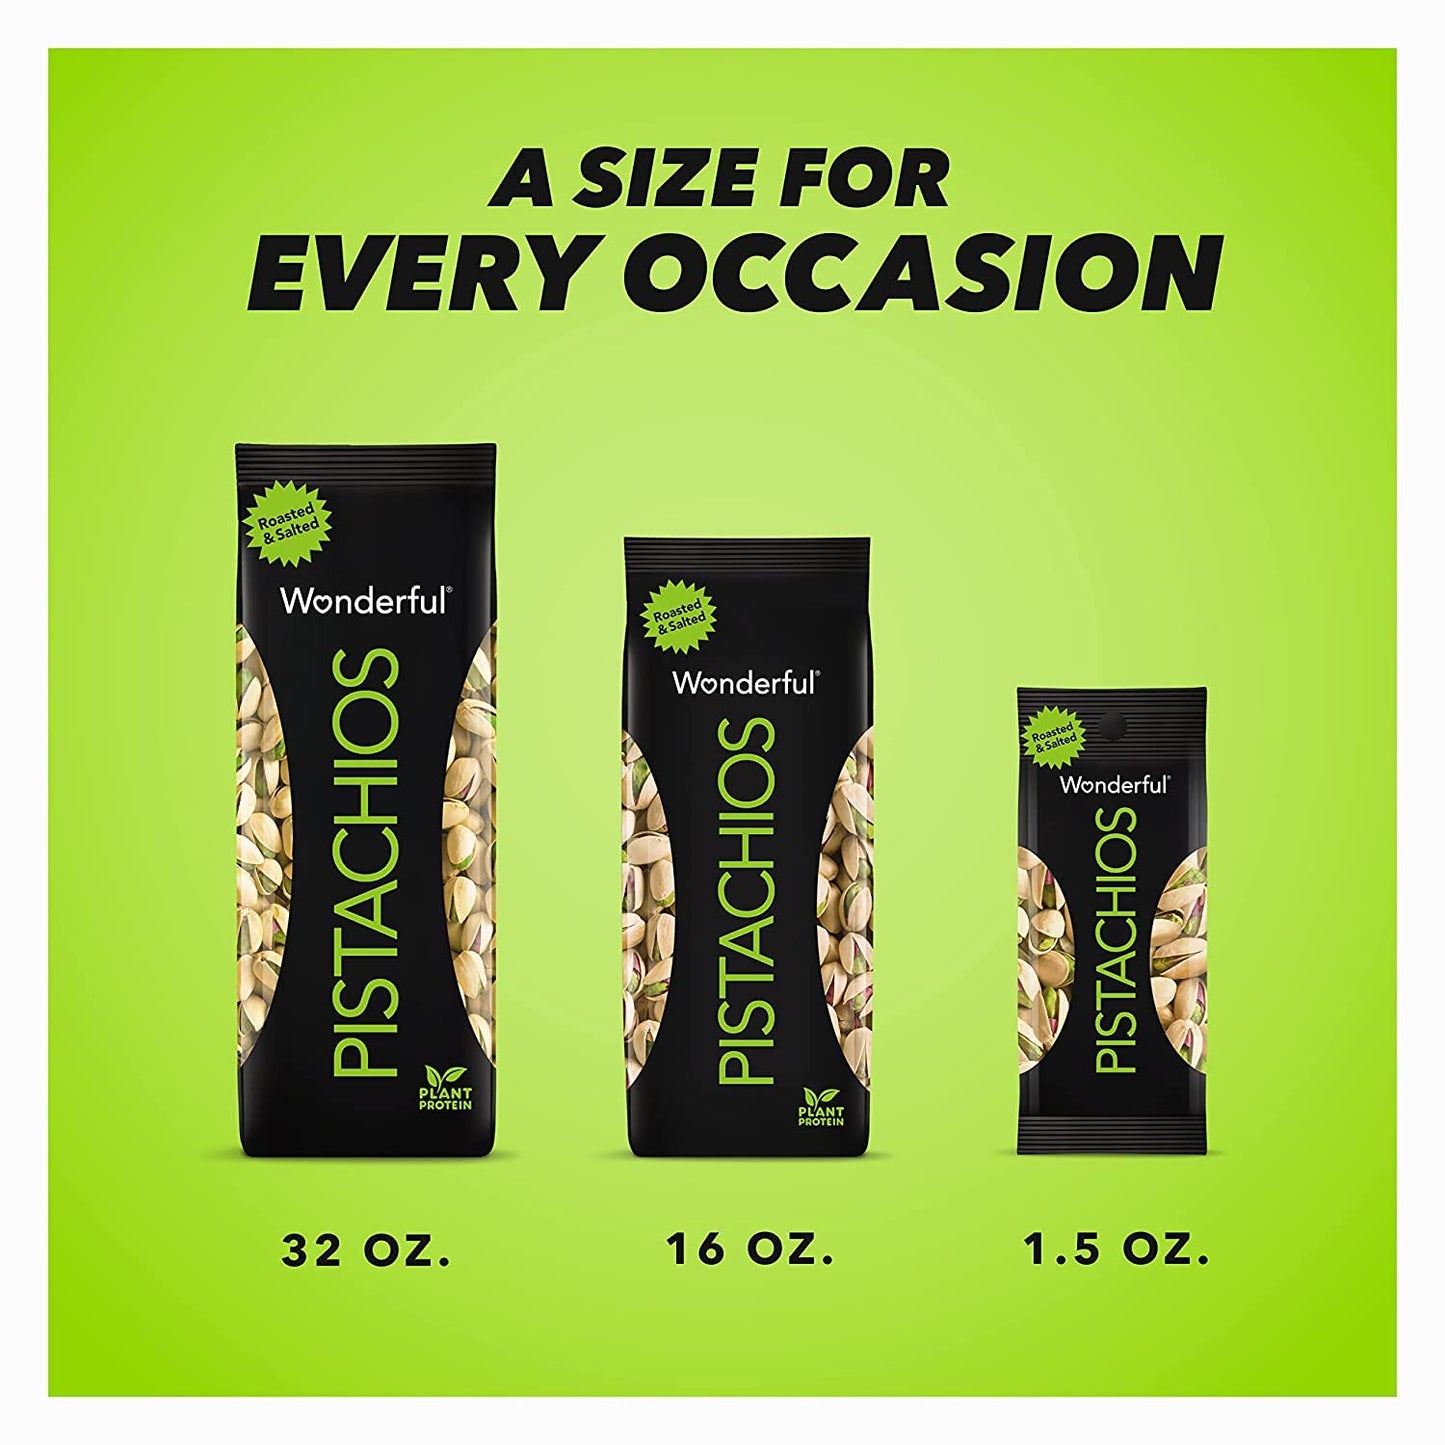 Roasted & Salted In-Shell Pistachios